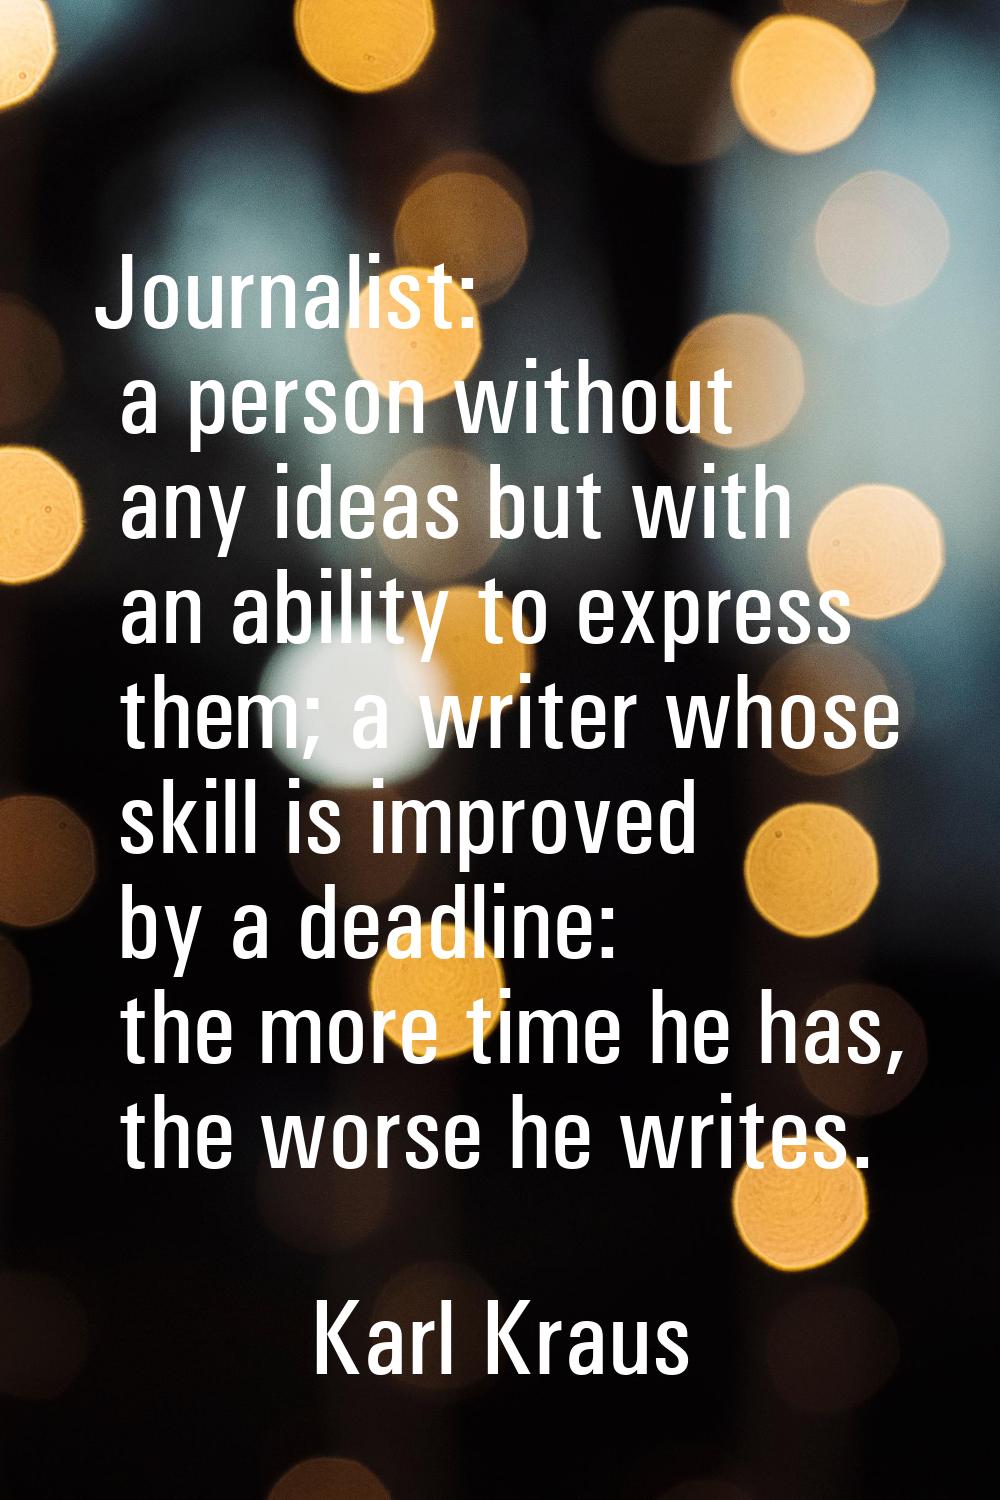 Journalist: a person without any ideas but with an ability to express them; a writer whose skill is